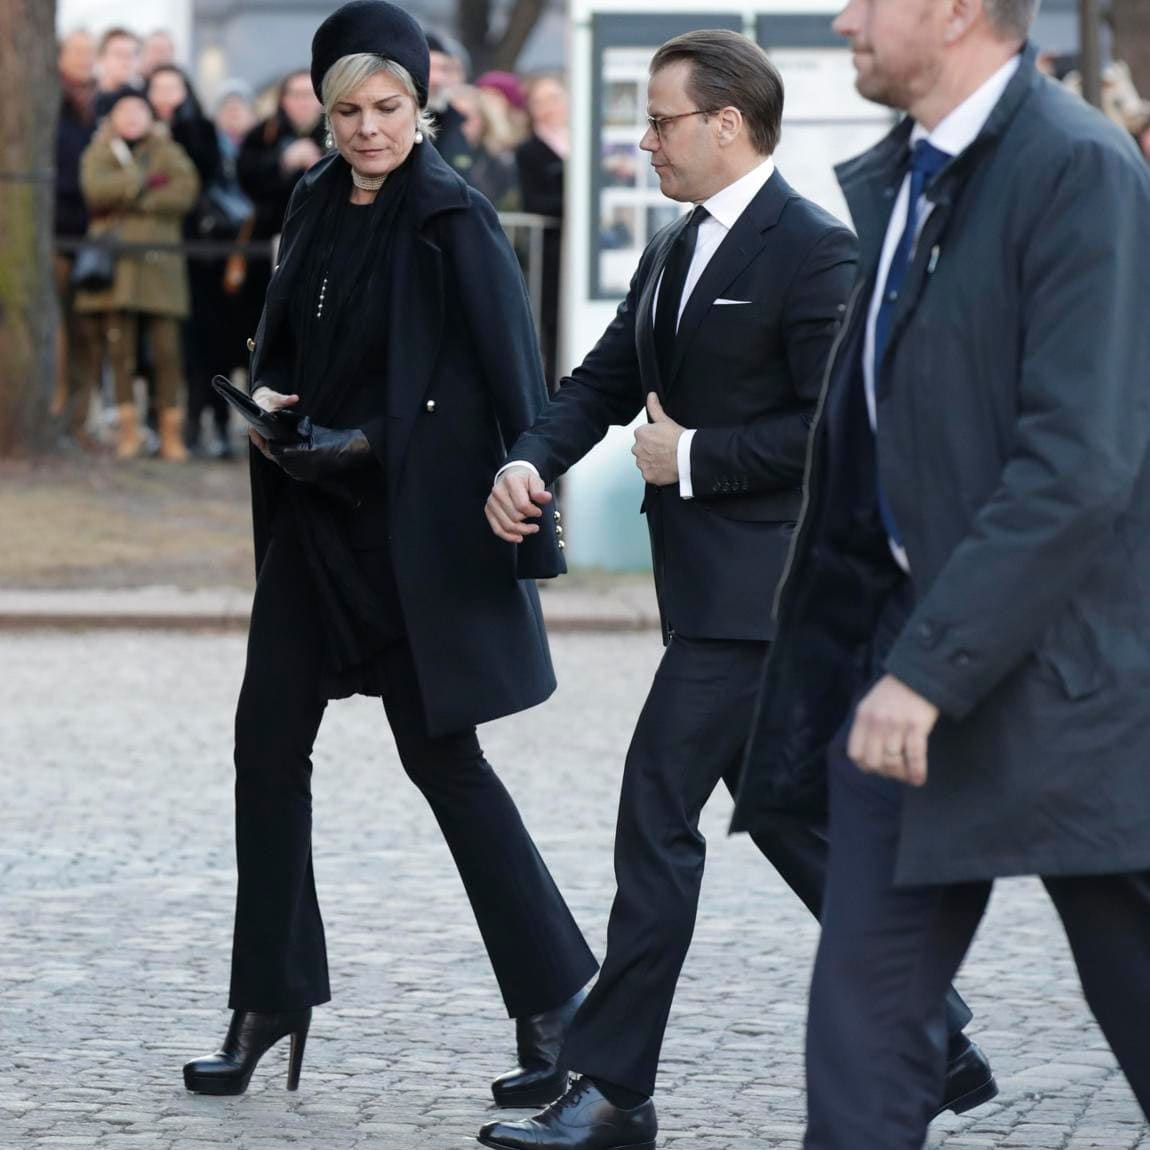 Prince Daniel attended Ari Behn's funeral on January 3